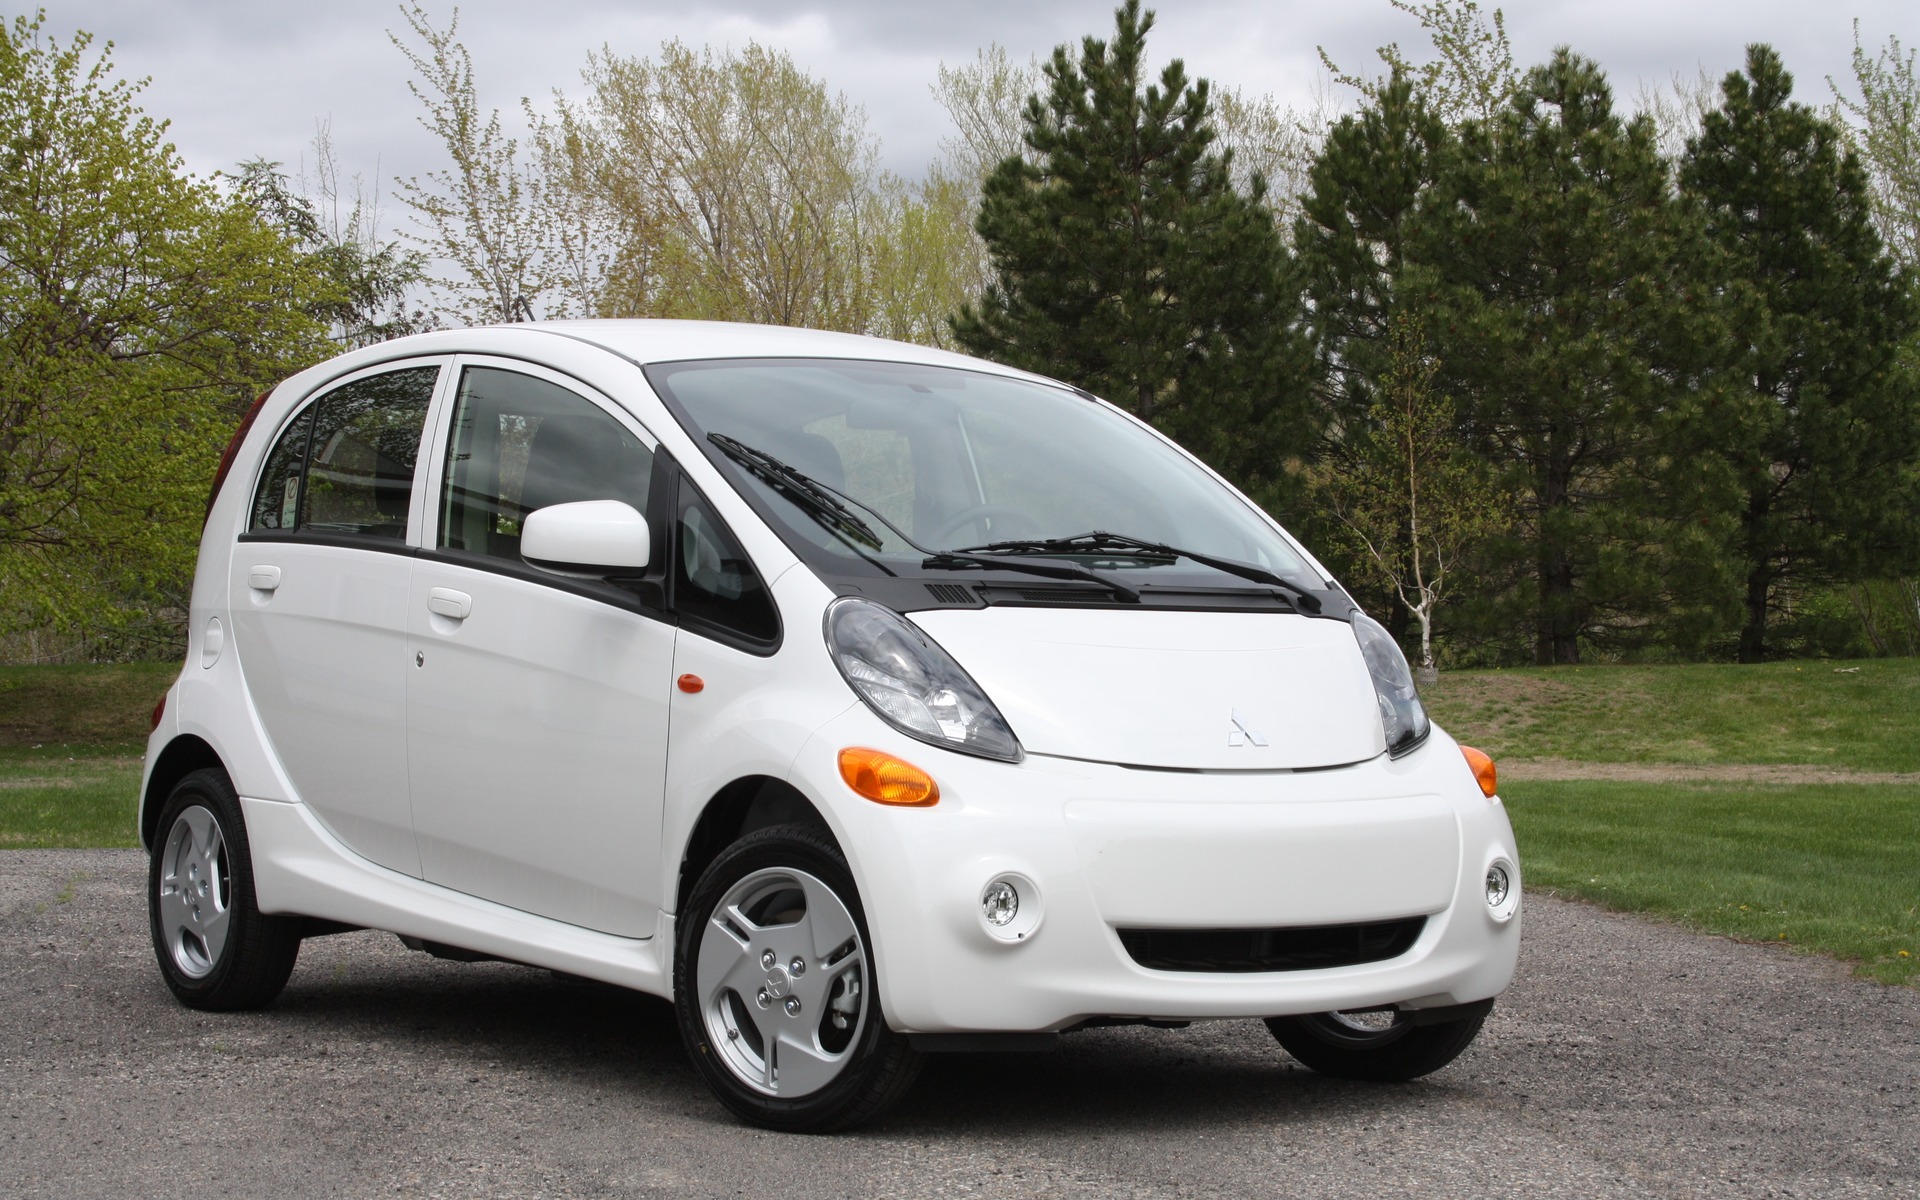 2017 Mitsubishi i MiEV Stay in the City The Car Guide